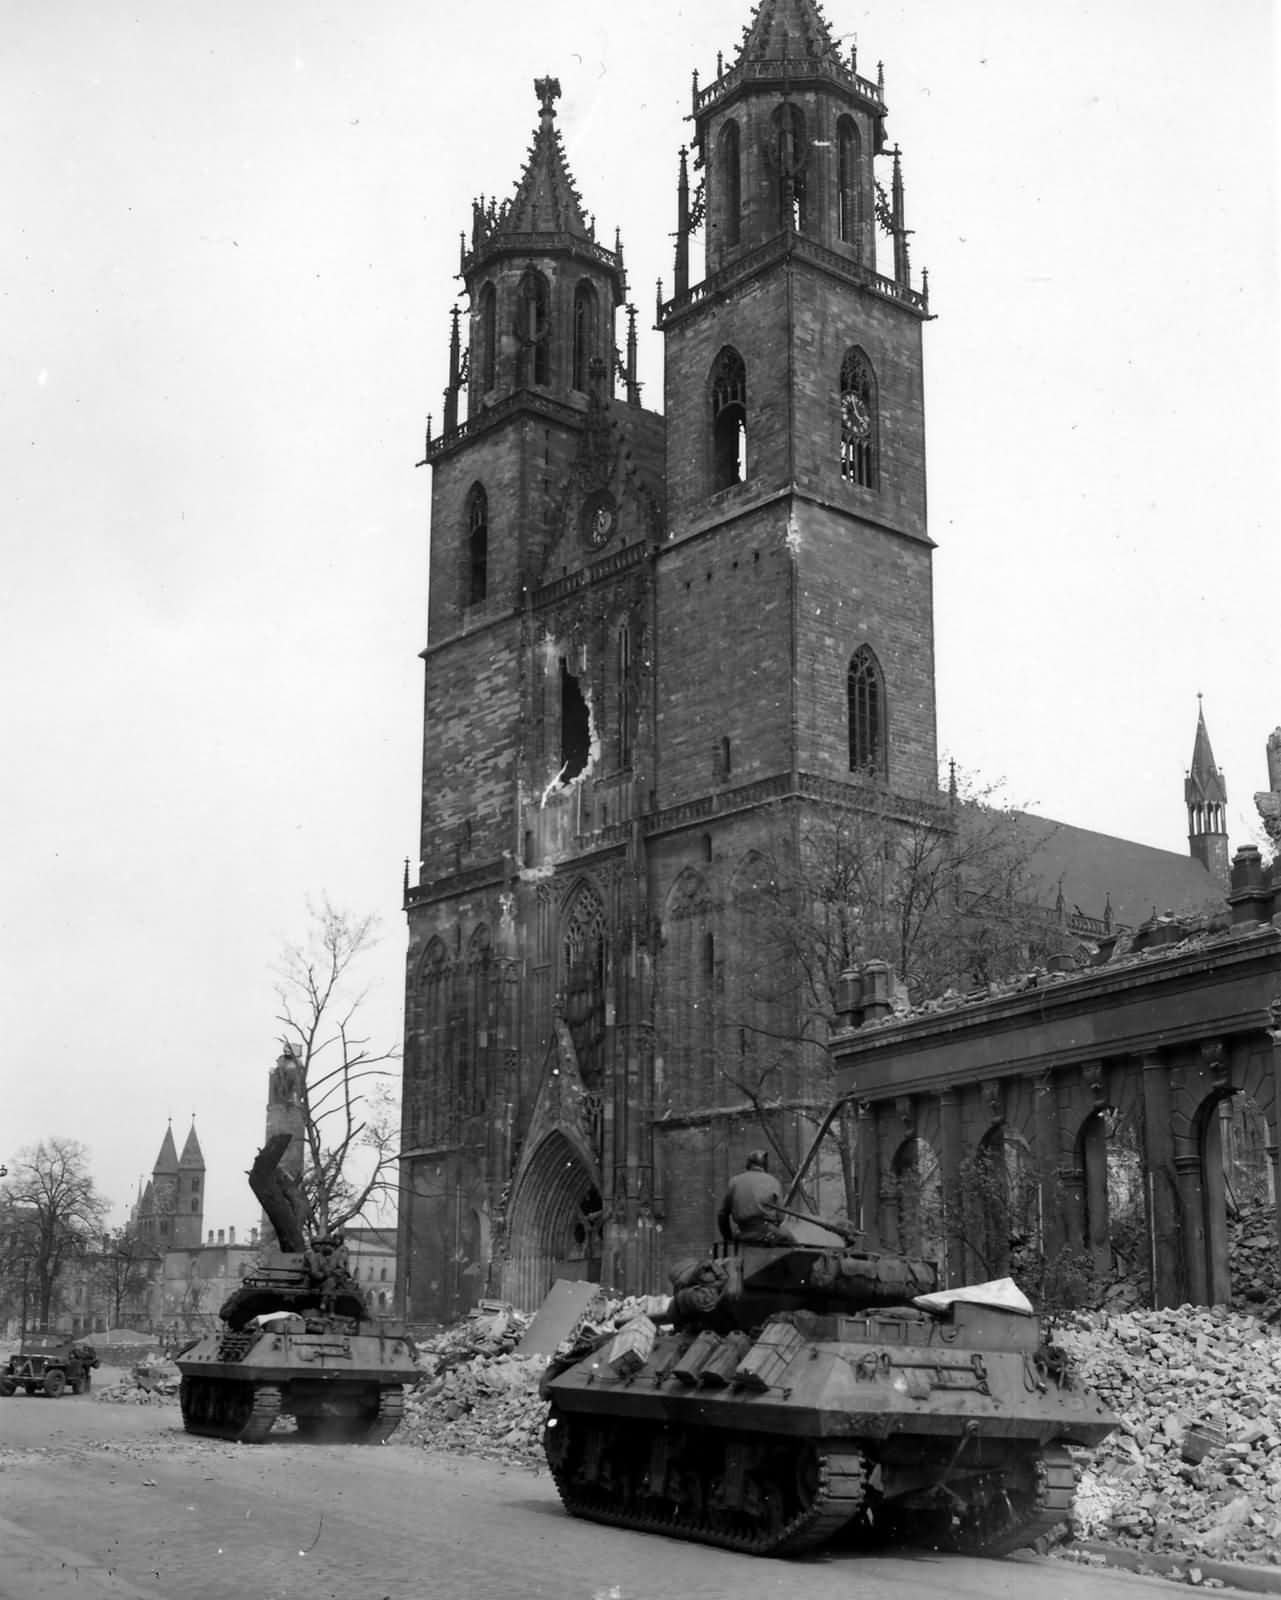 M10_Wolverine_Tank_Destroyers_30th_Infantry_Division_Magdeburg_Germany_1945